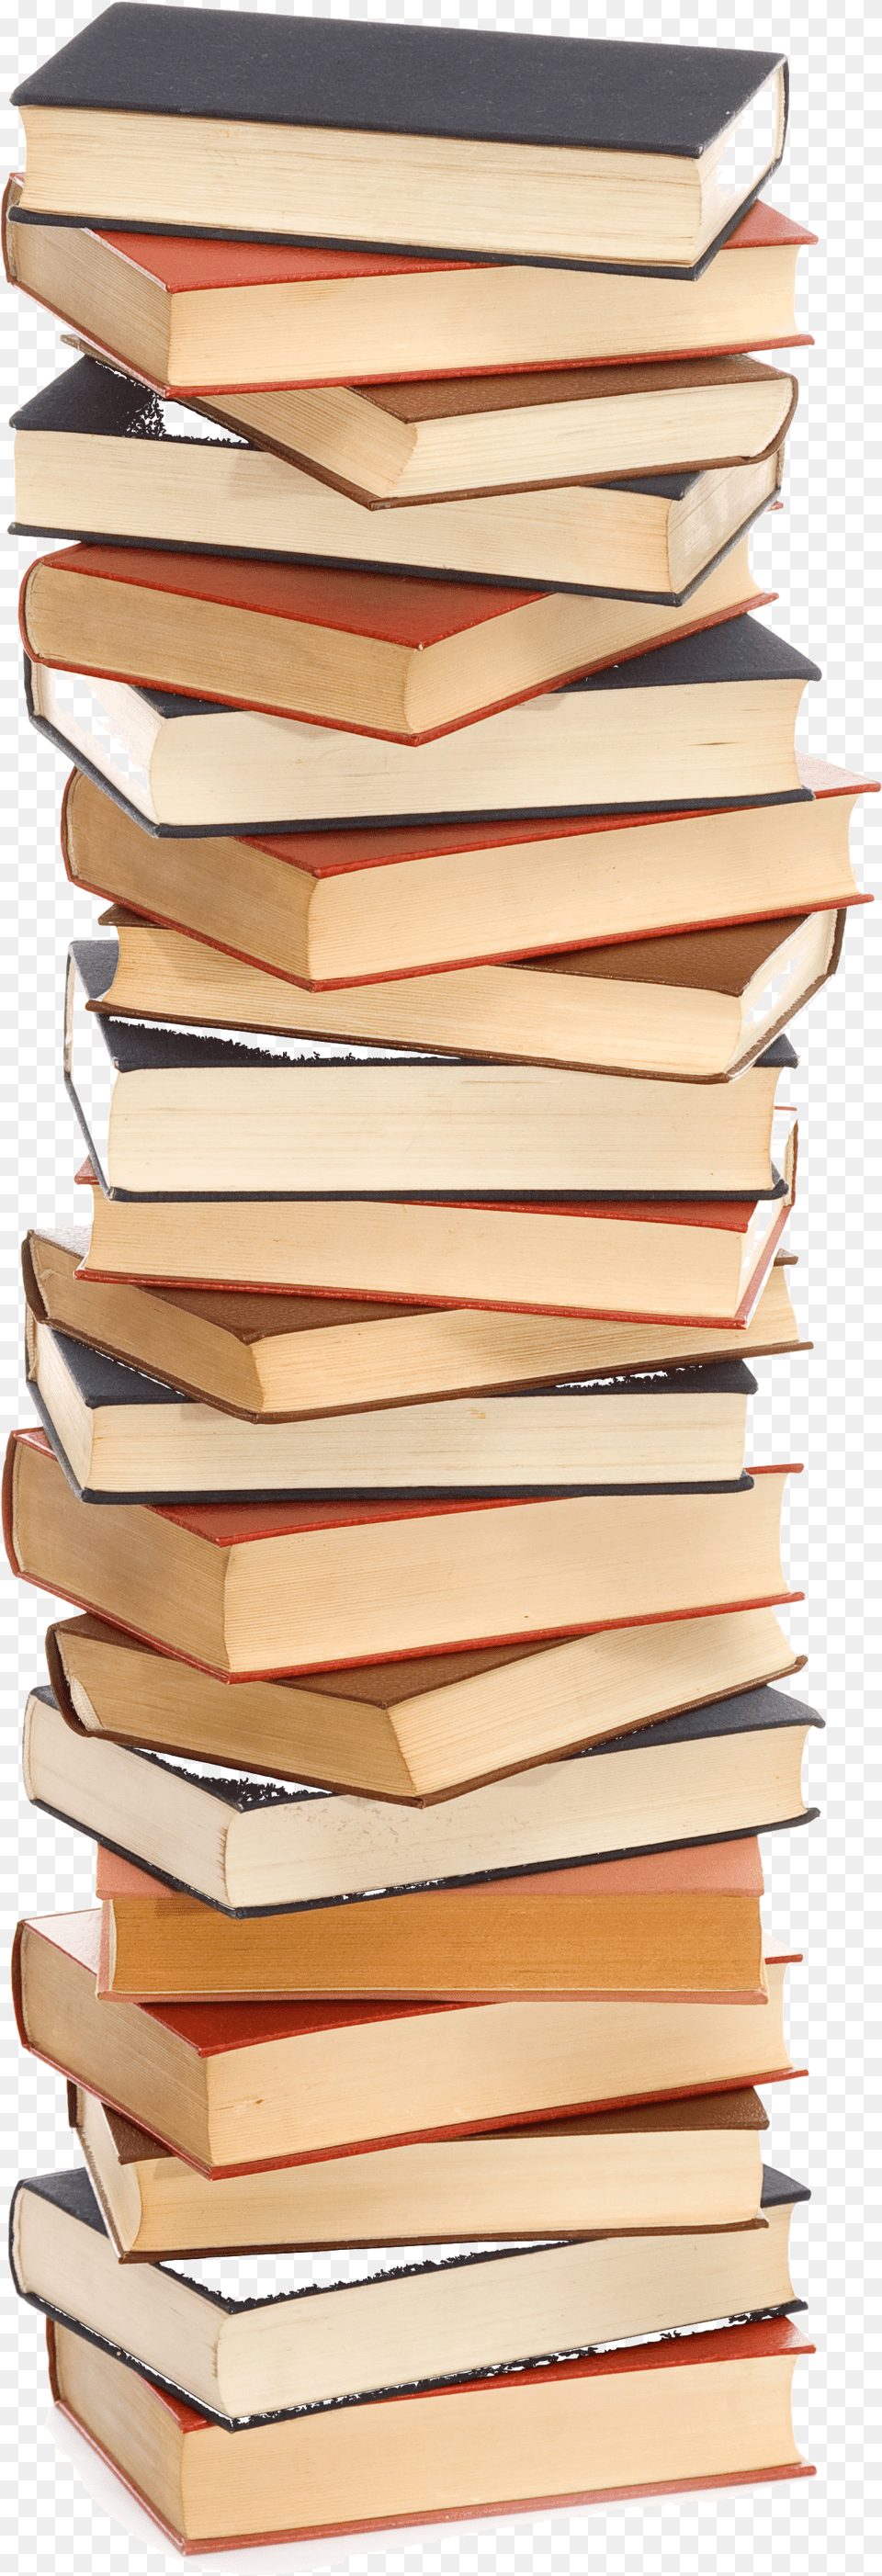 Textbook Clip Art Transparent Background Book Pile Free Png